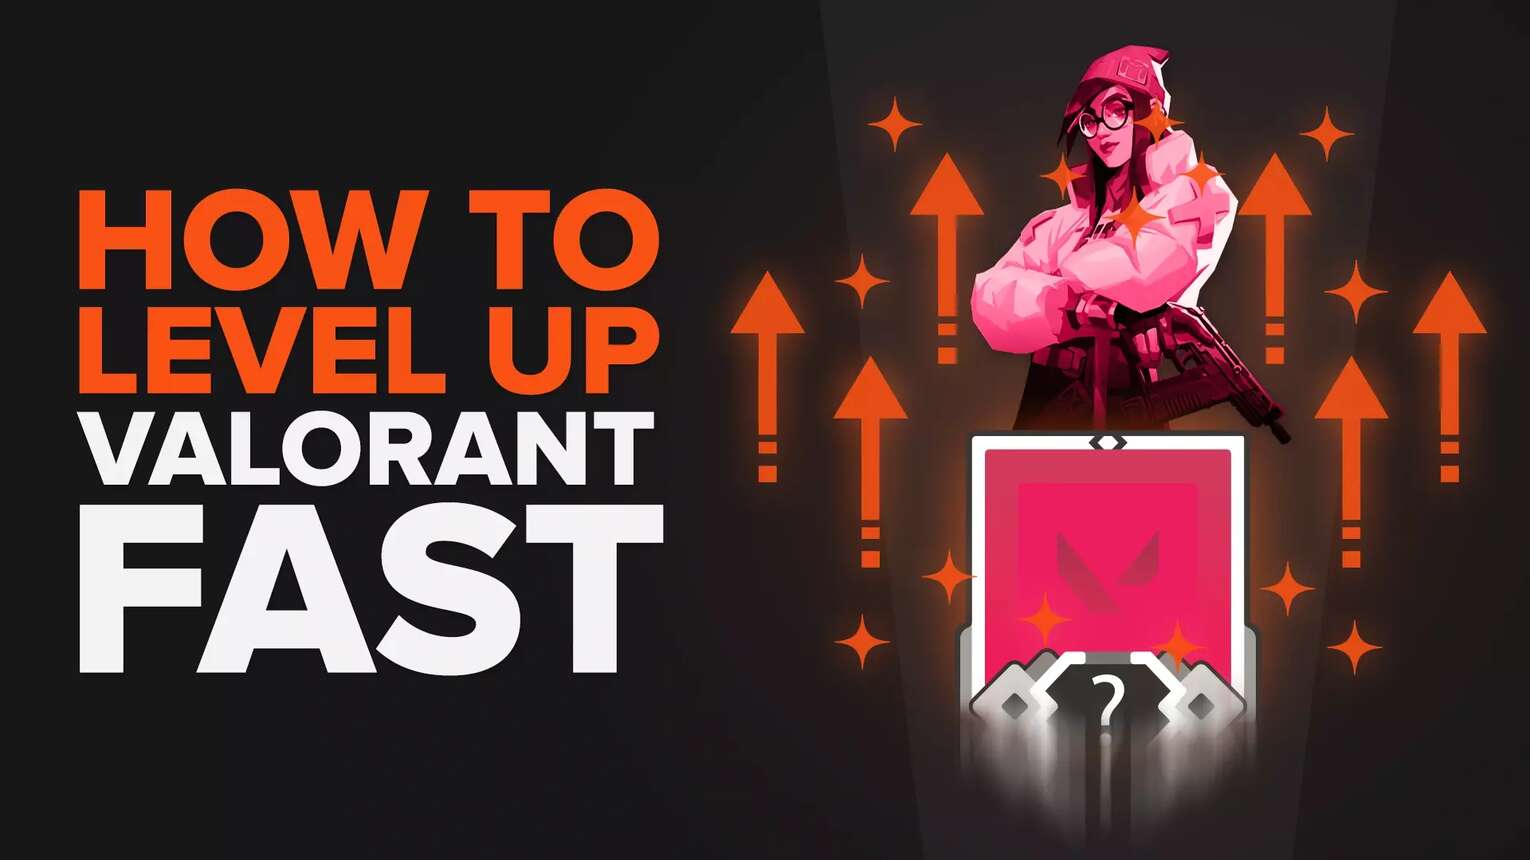 How To Level Up Account Level Fast In Valorant [Explained]